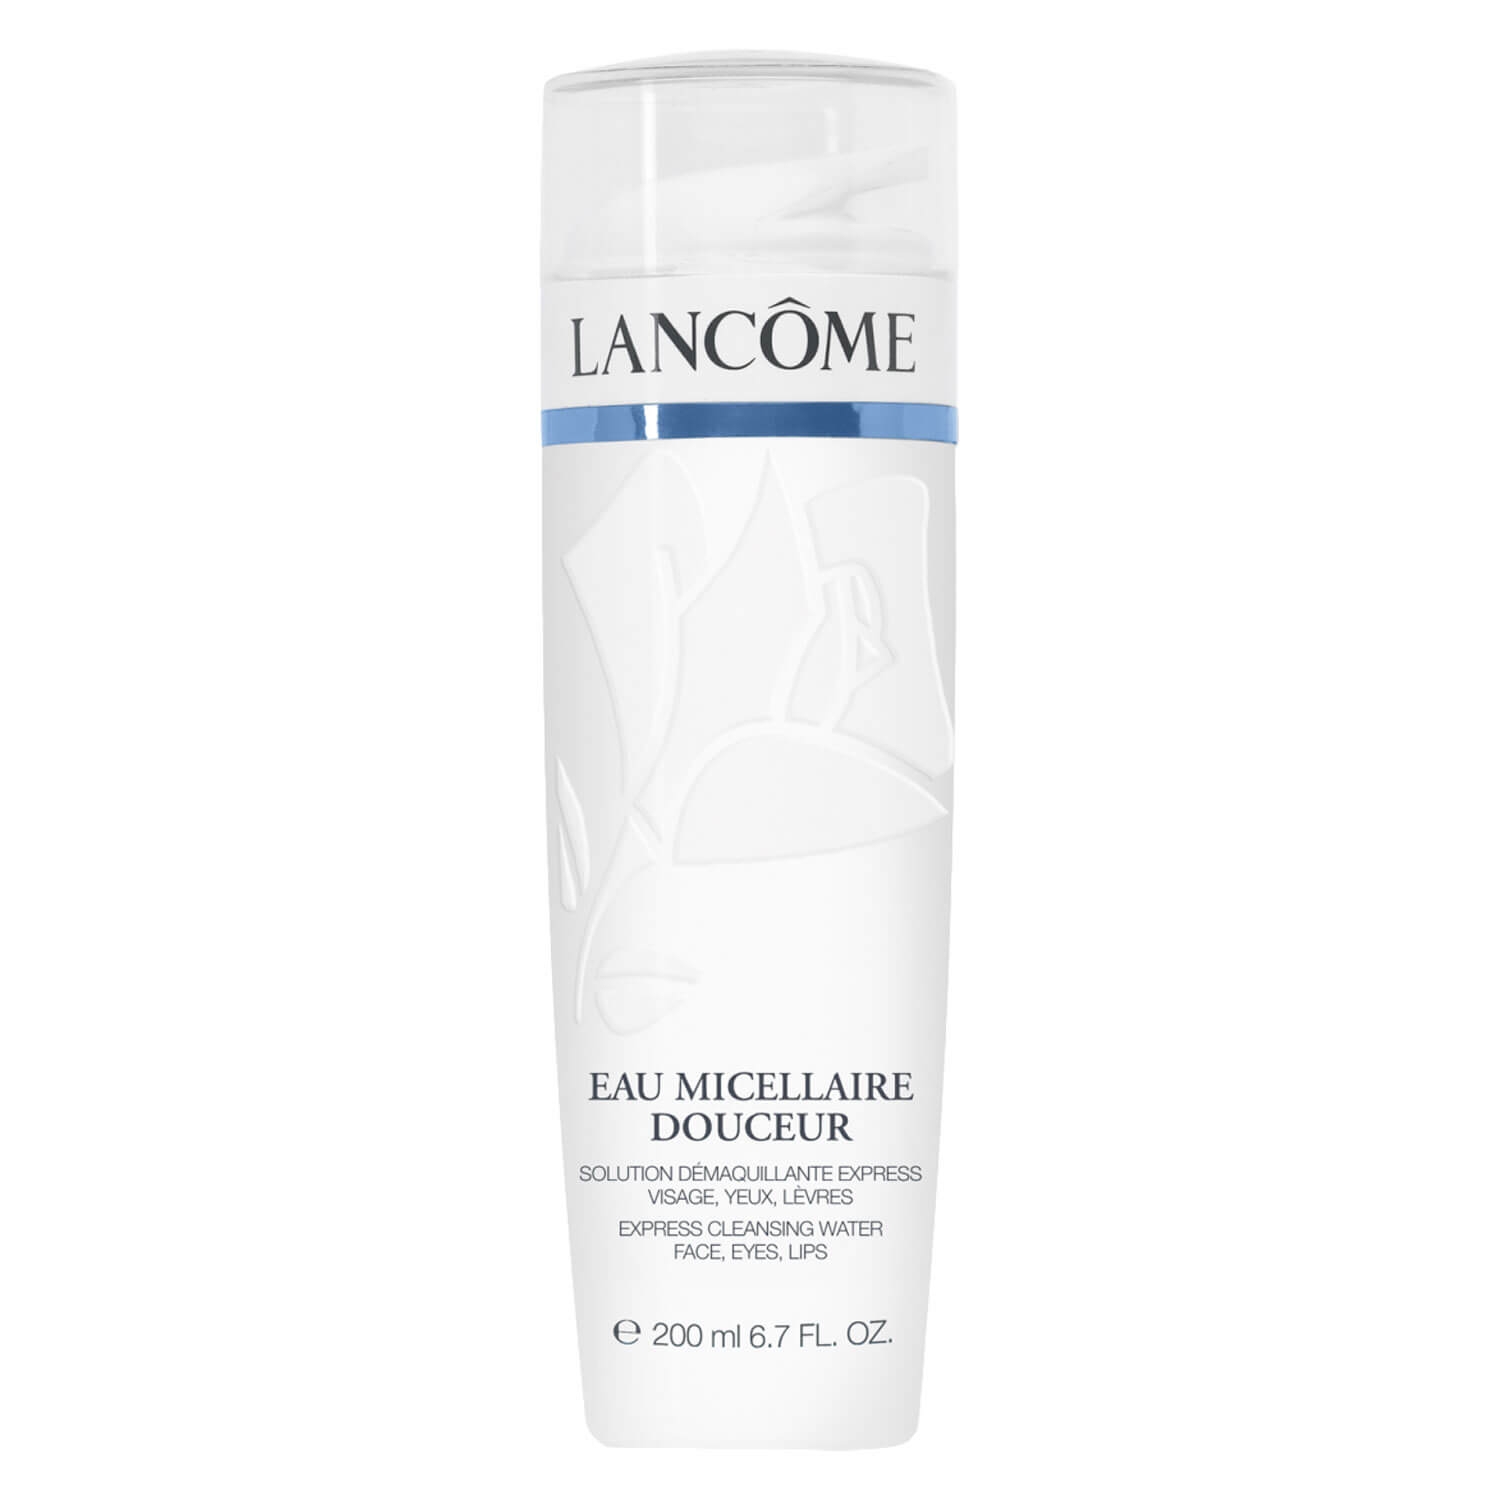 Product image from Lancôme Skin - Eau Micellaire Douceur